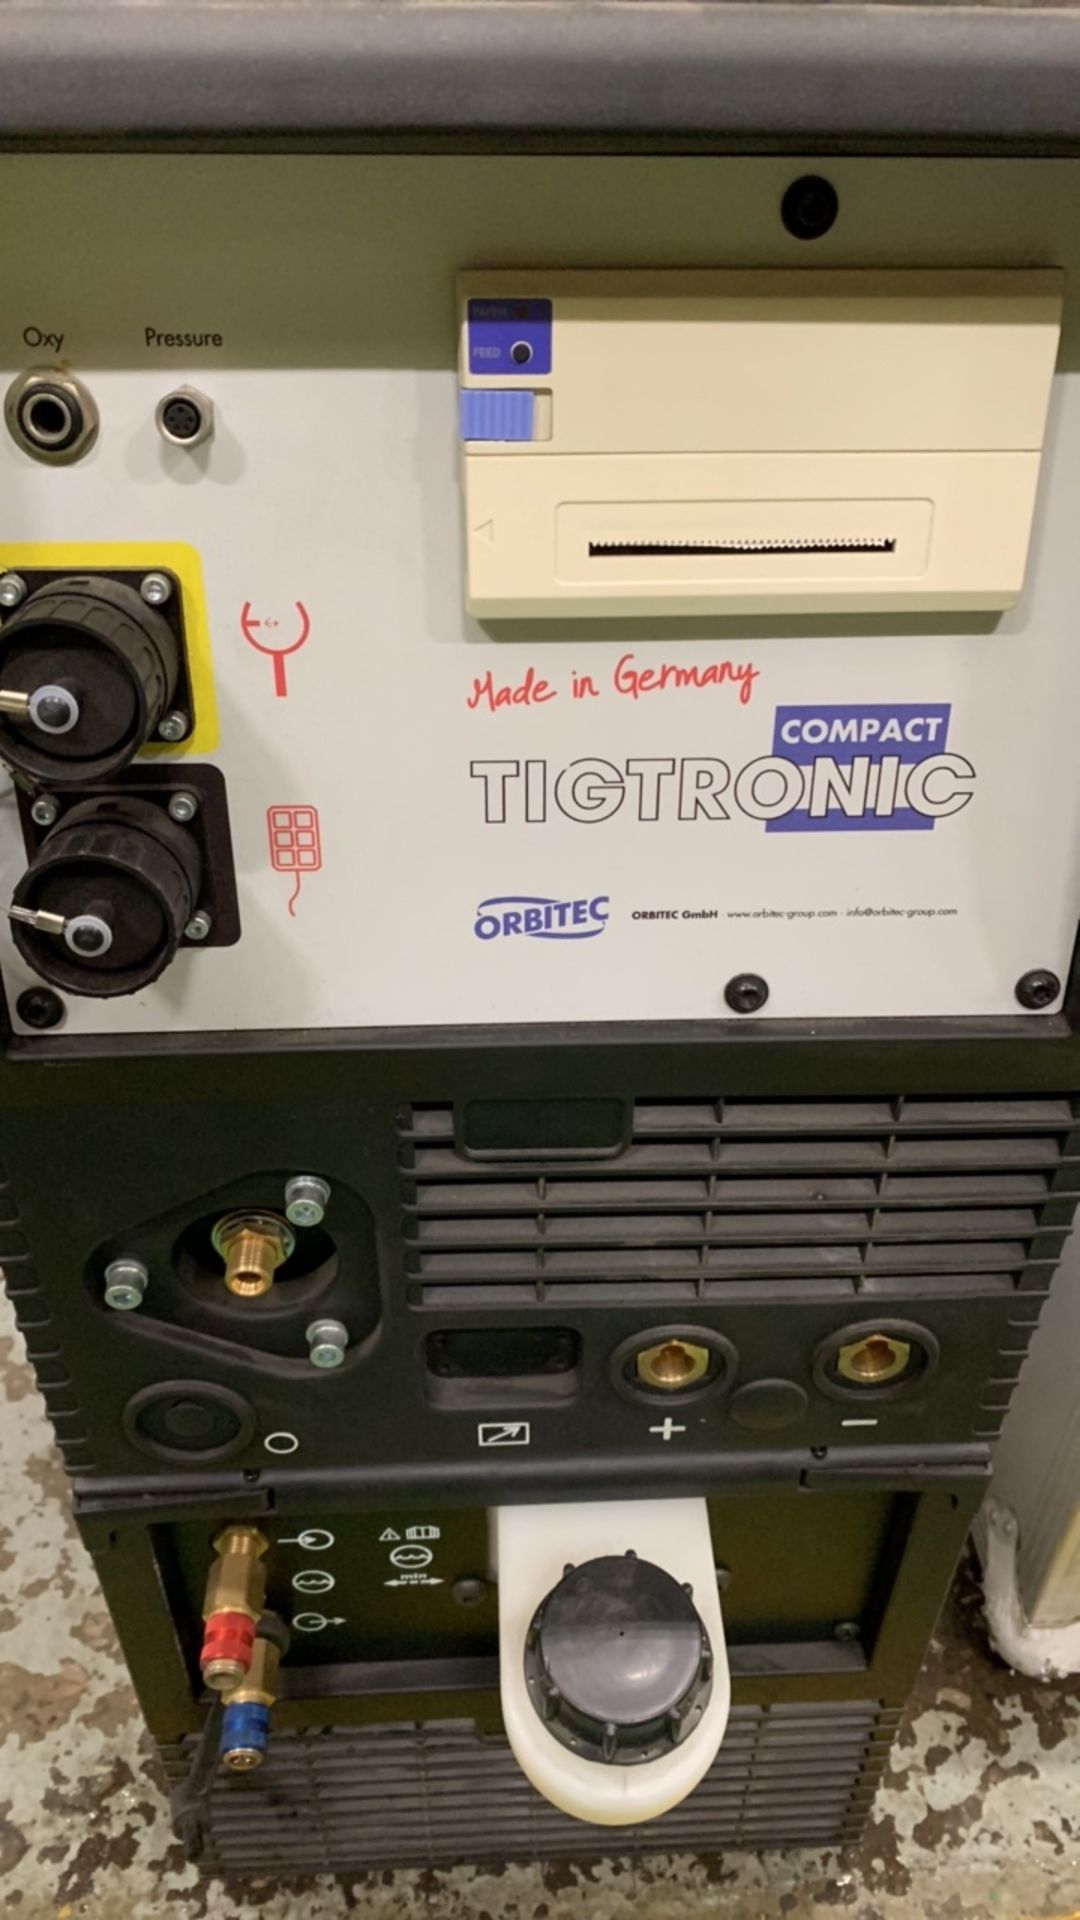 Orbitec Tigtronic Compact 200 MV Orbtial Welding Controller with Orbitec RBK 60 Tube to Sheet Weld H - Image 2 of 7